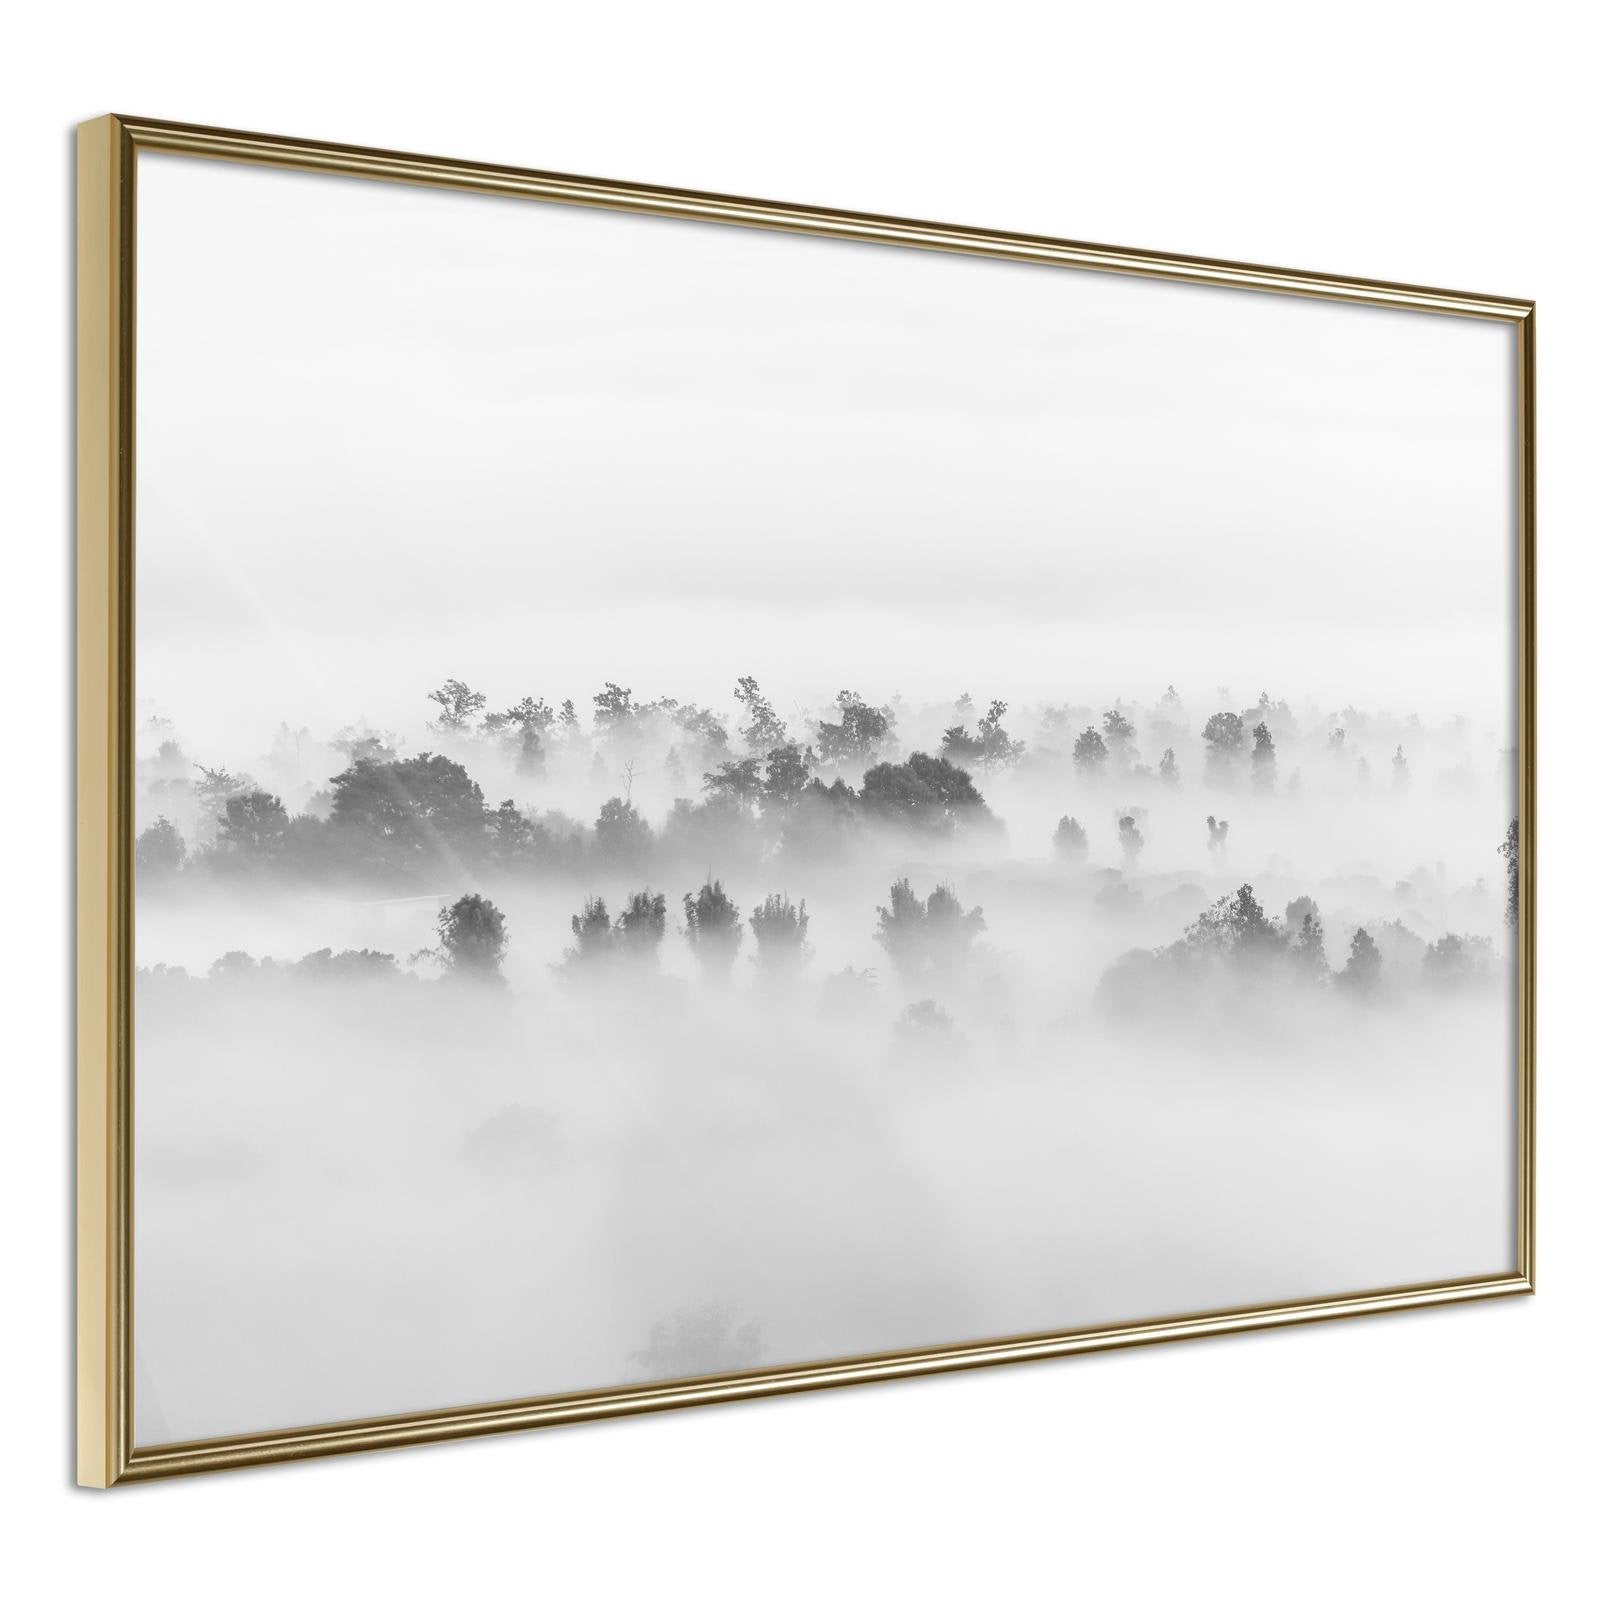 Inramad Poster / Tavla - Fog Over the Forest-Poster Inramad-Artgeist-30x20-Guldram-peaceofhome.se